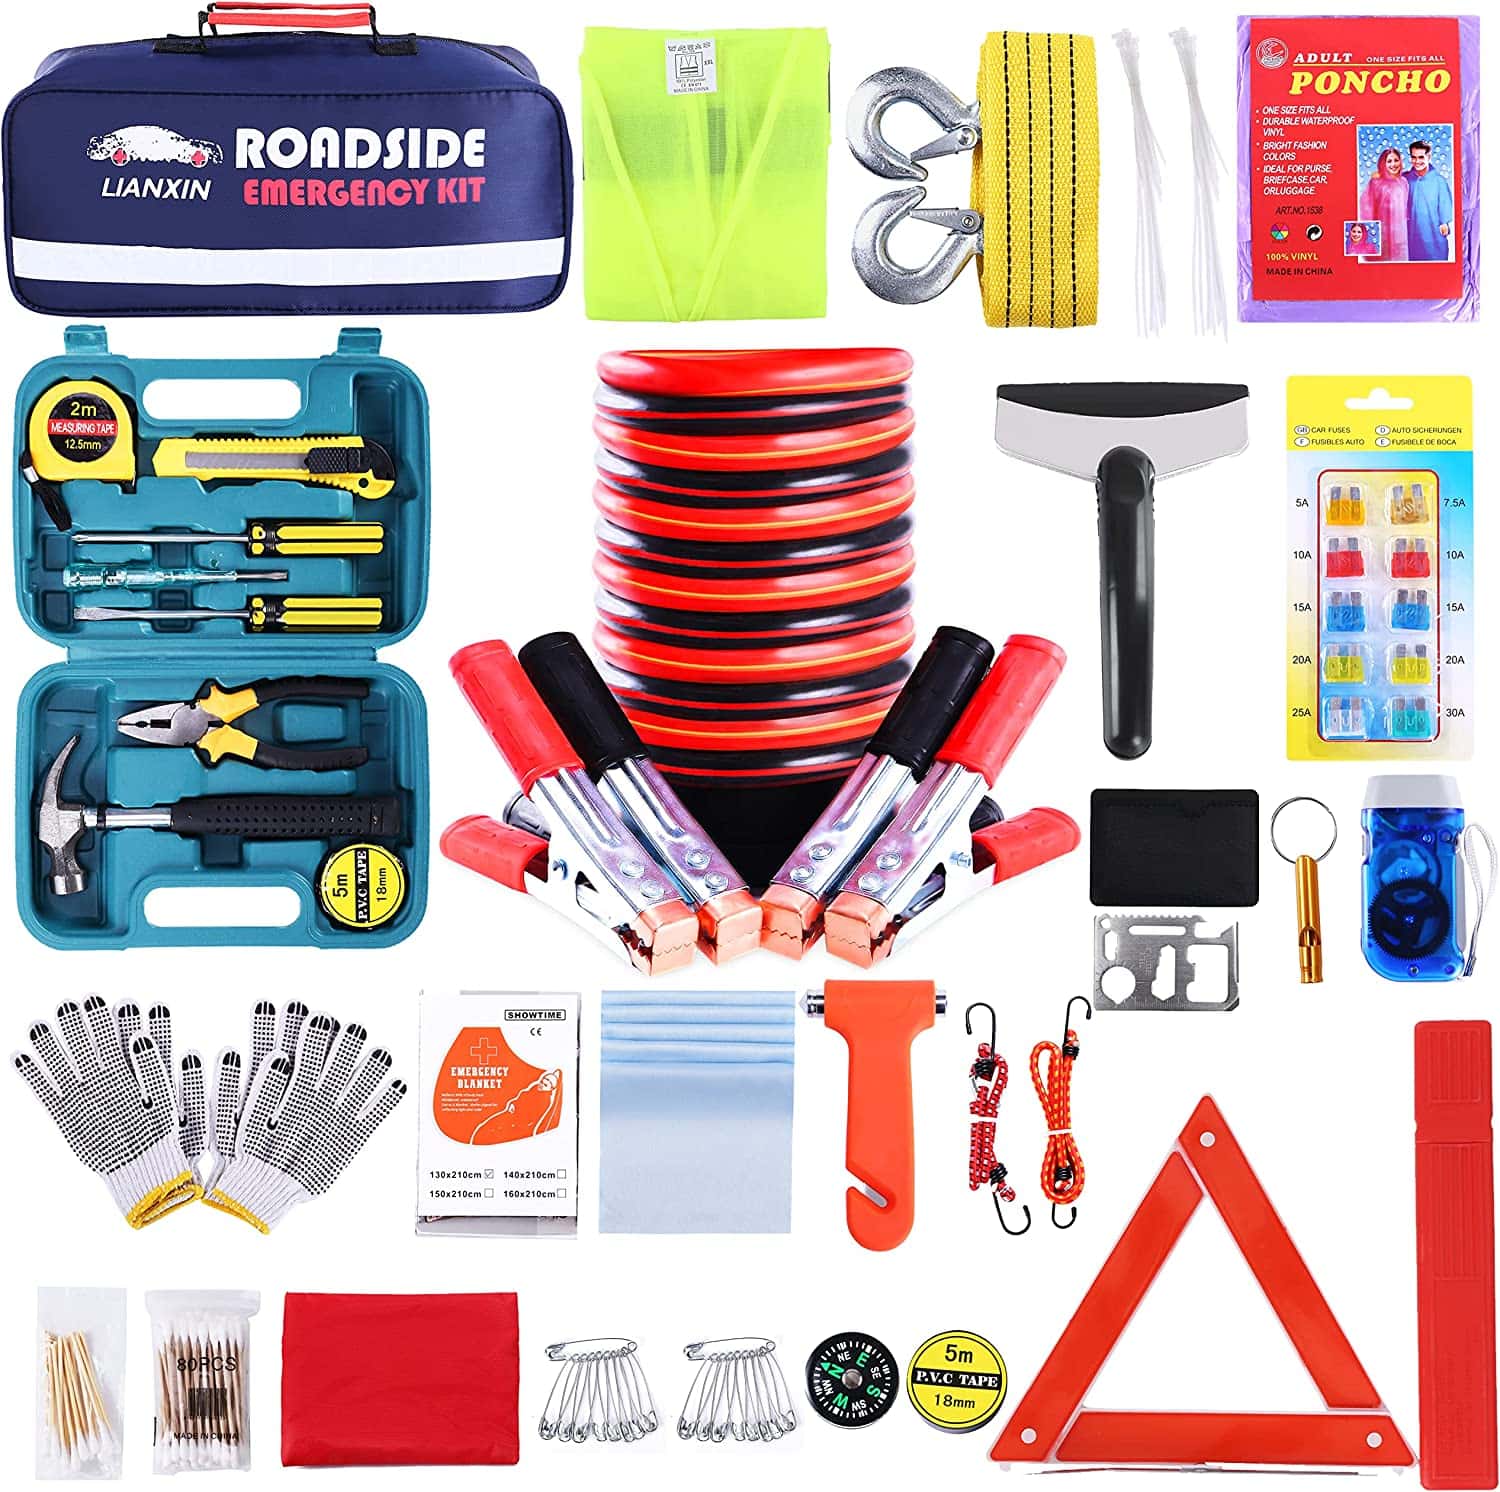 Items in a roadside emergency kit (tools, jumper cables, gloves, reflectors...)